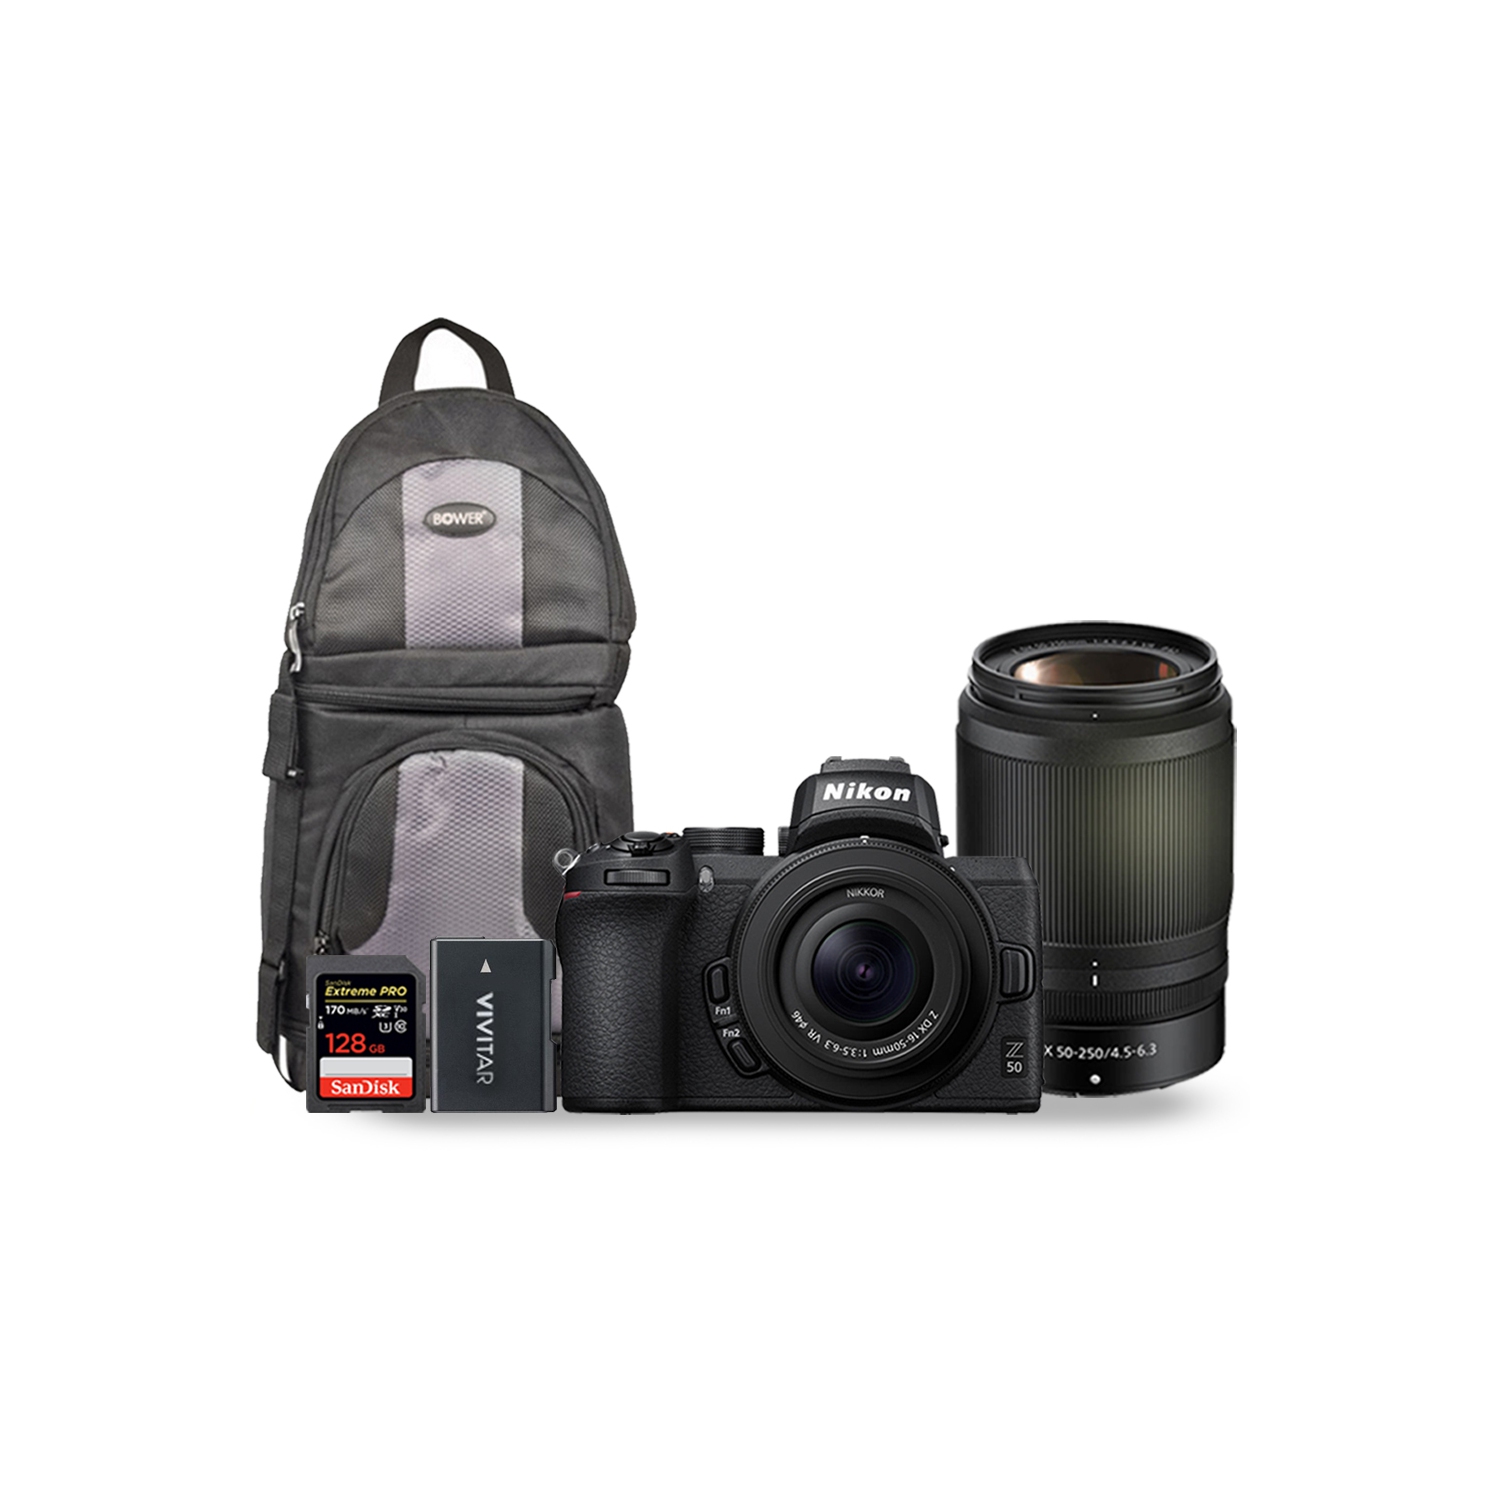 Nikon Z 50 Mirrorless Digital Camera with 16-50mm and 50-250mm Z VR + SanDisk Extreme Pro 128GB SDXC Memory Card + BackPack + Vivitar EN-EL25 Replacement Battery